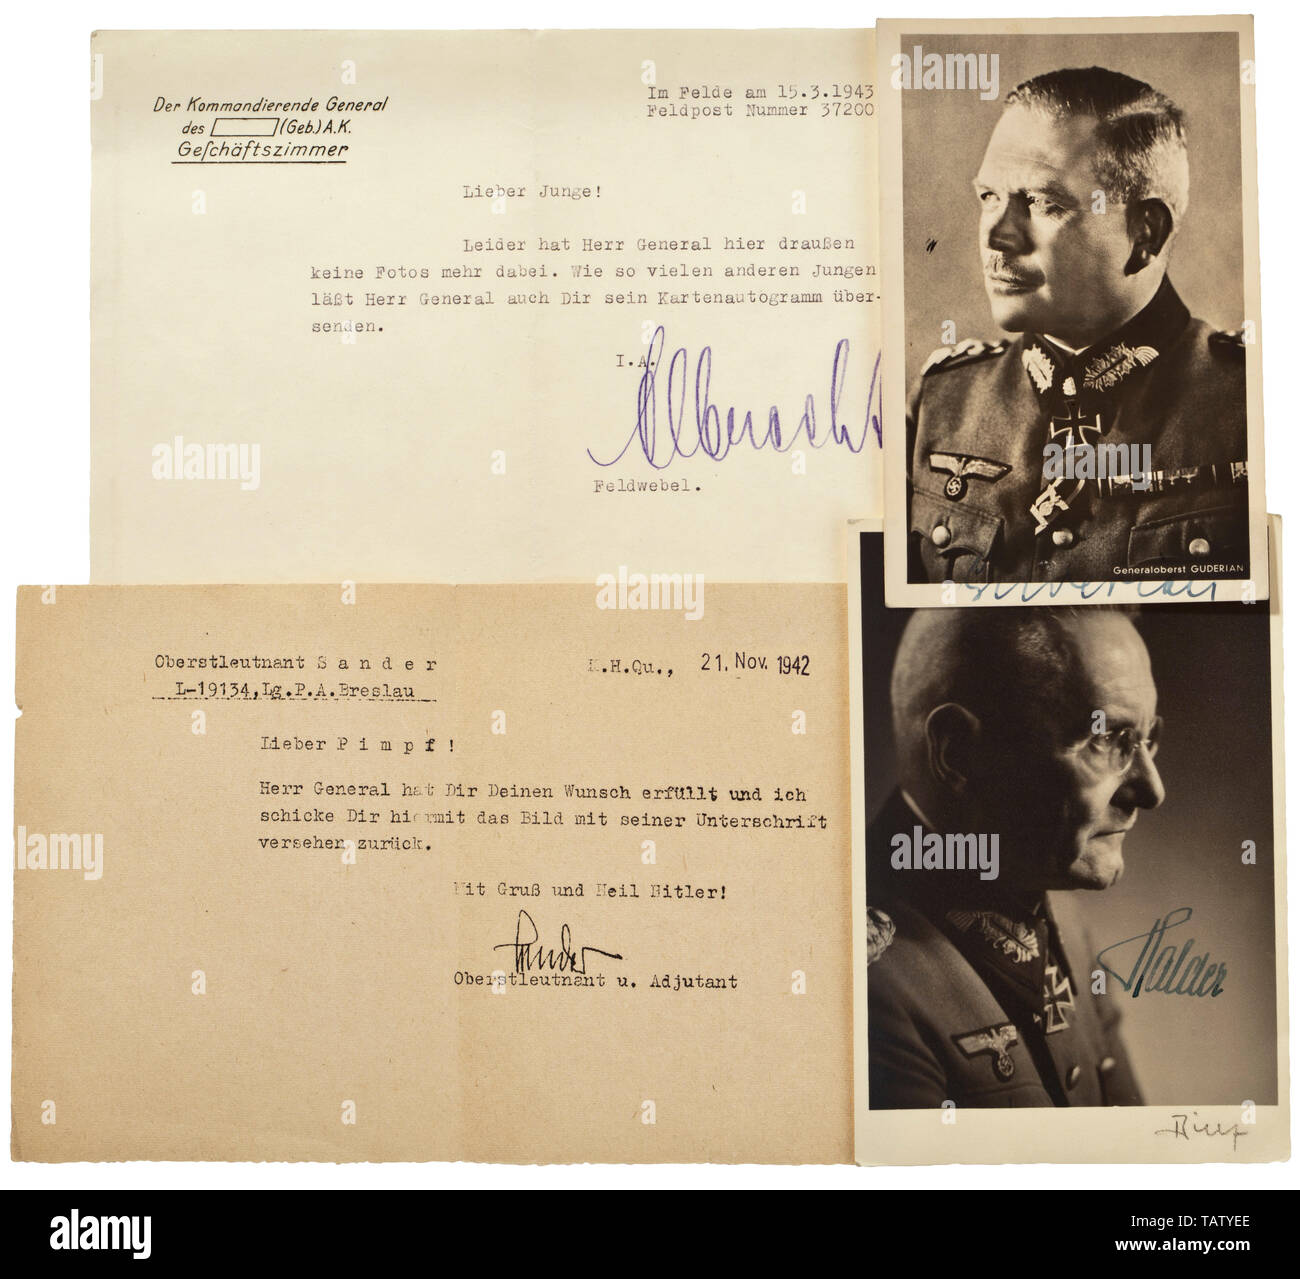 An album with photographs/portraits of Knight's Cross winners, mostly with dedication or original signatures, Partly captioned, with approx. 70 inserted or glued-in photographs and picture postcards of many highly decorated members of the Wehrmacht from all branches of service. Mostly of size 9 x 13 cm, with autograph or original signature in ink, some with stamped signature. Partly enclosed is the original correspondence, in which the Hitler Youth Kurt Heß requests to be sent a signed photograph. The high-quality portrait photographs show famous winners such as Mölders, v., Editorial-Use-Only Stock Photo